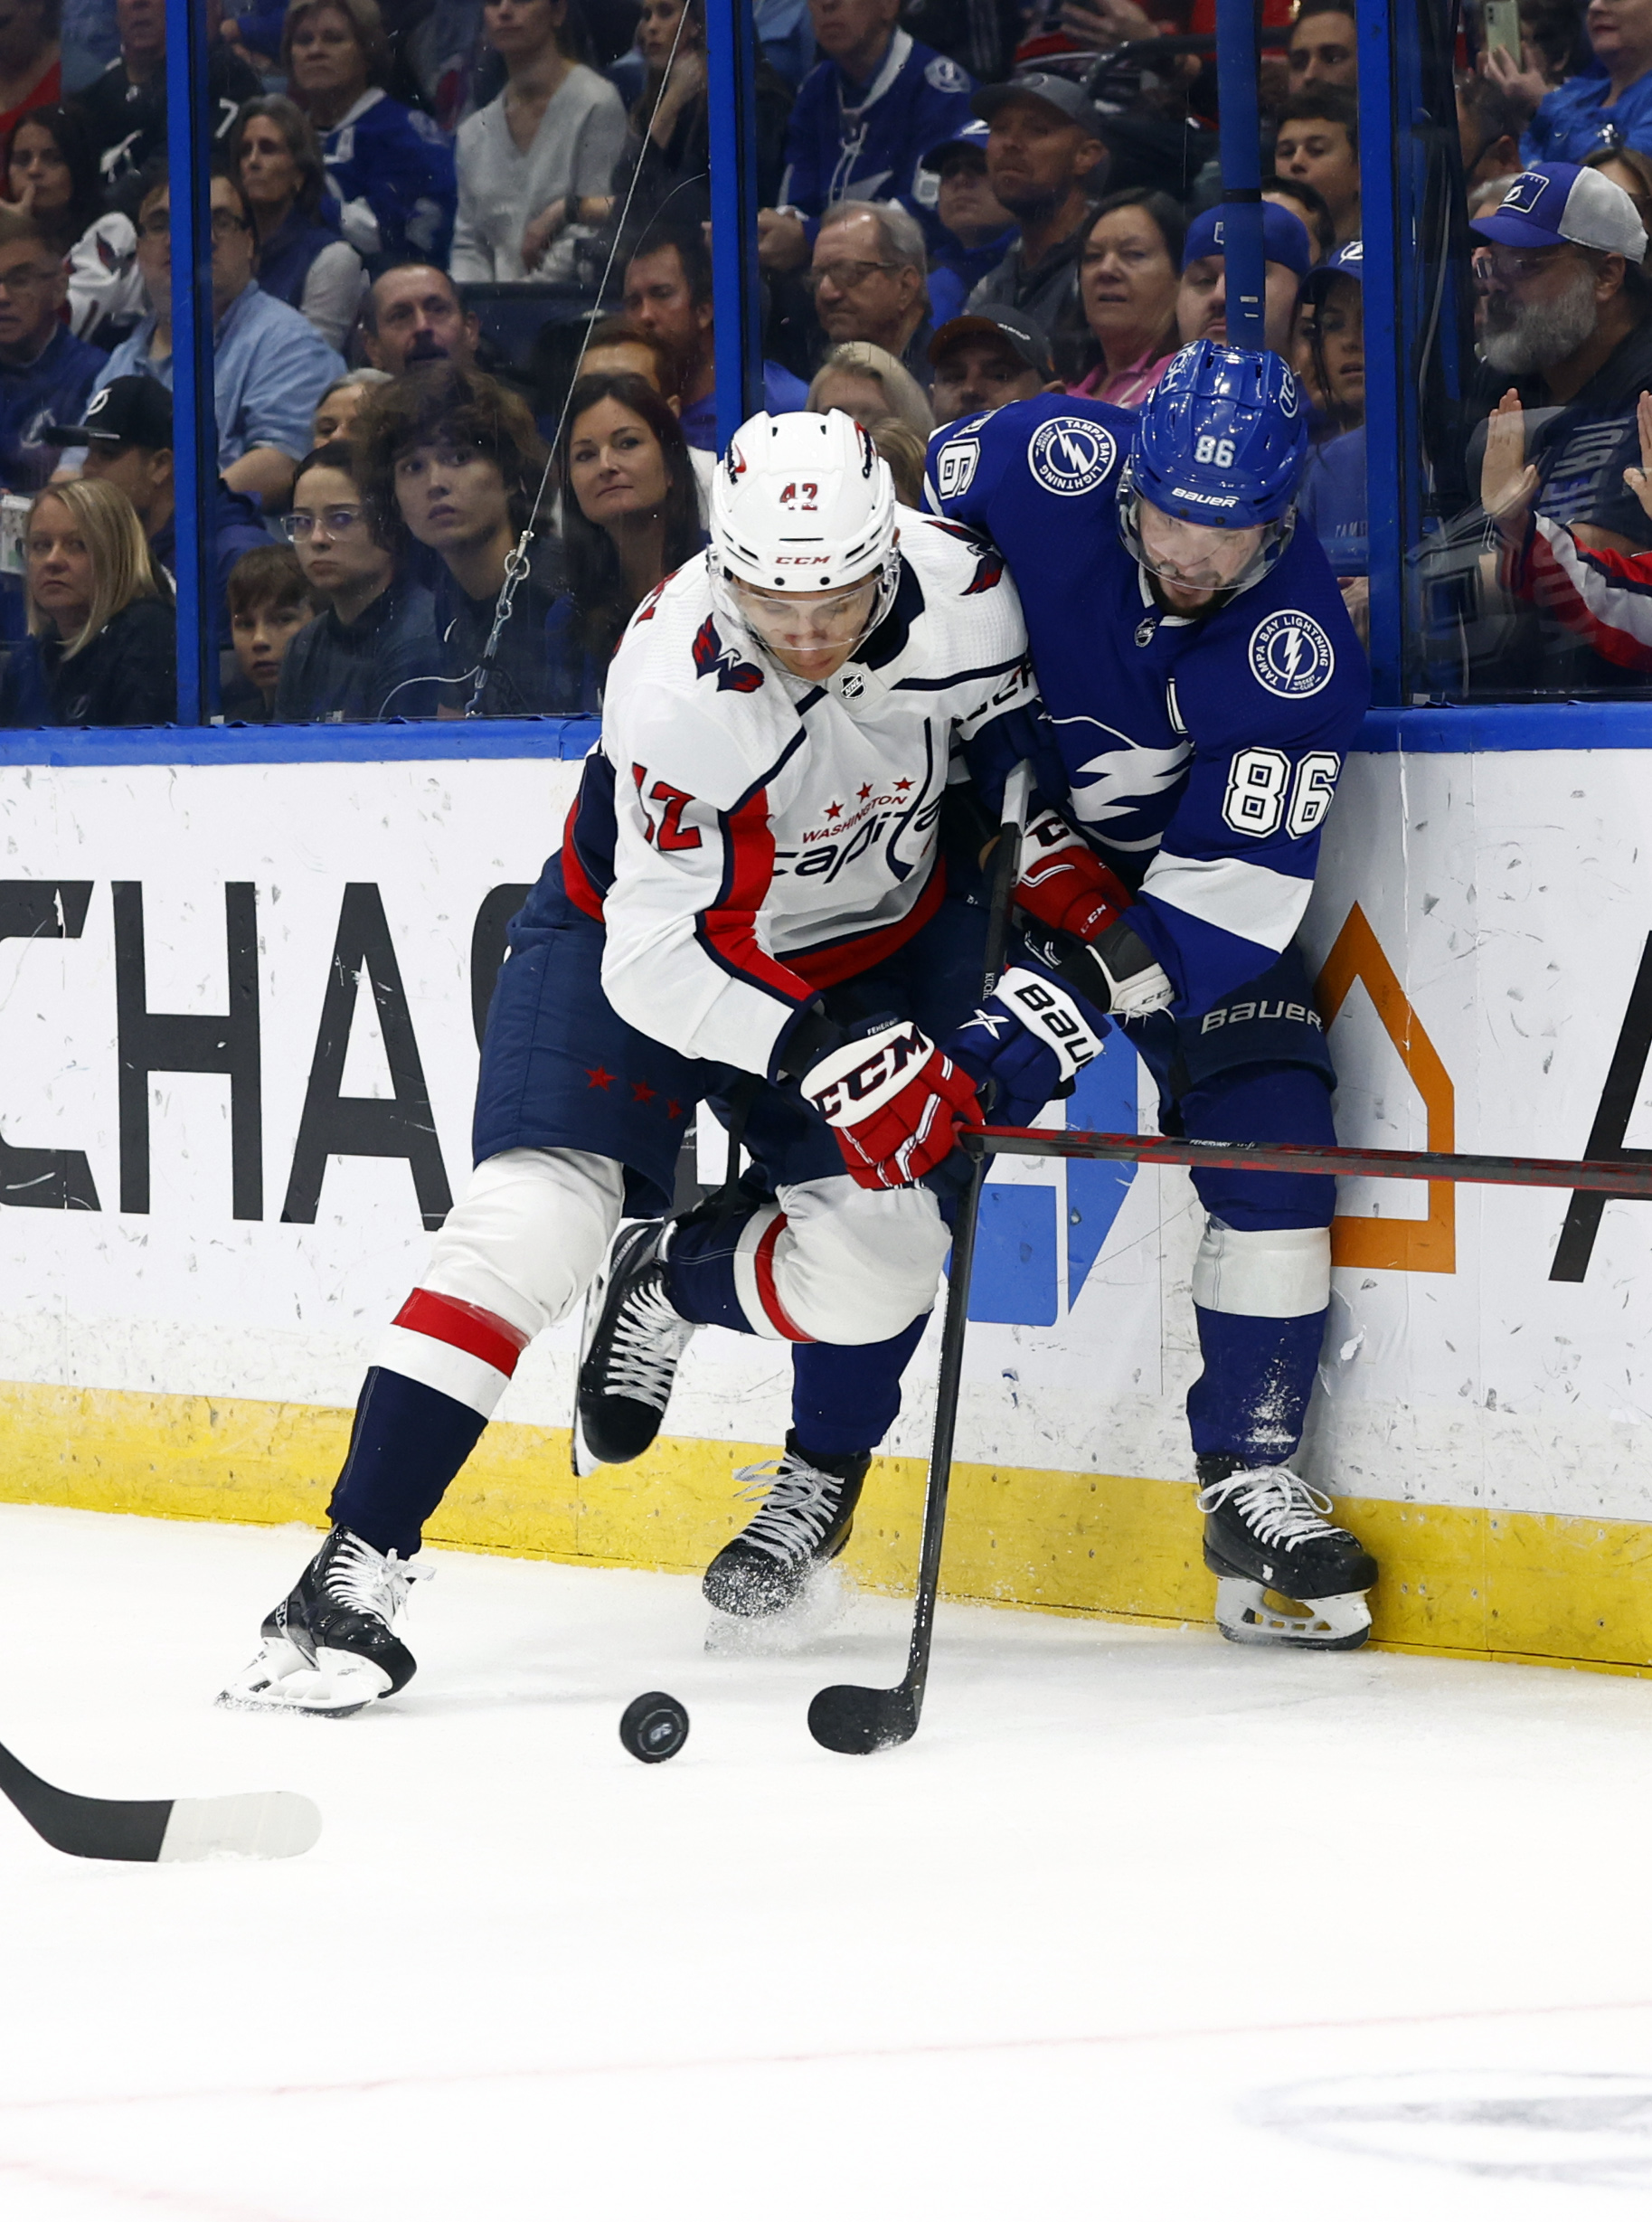 Capitals' winger Carl Hagelin retires from the NHL because of an eye injury